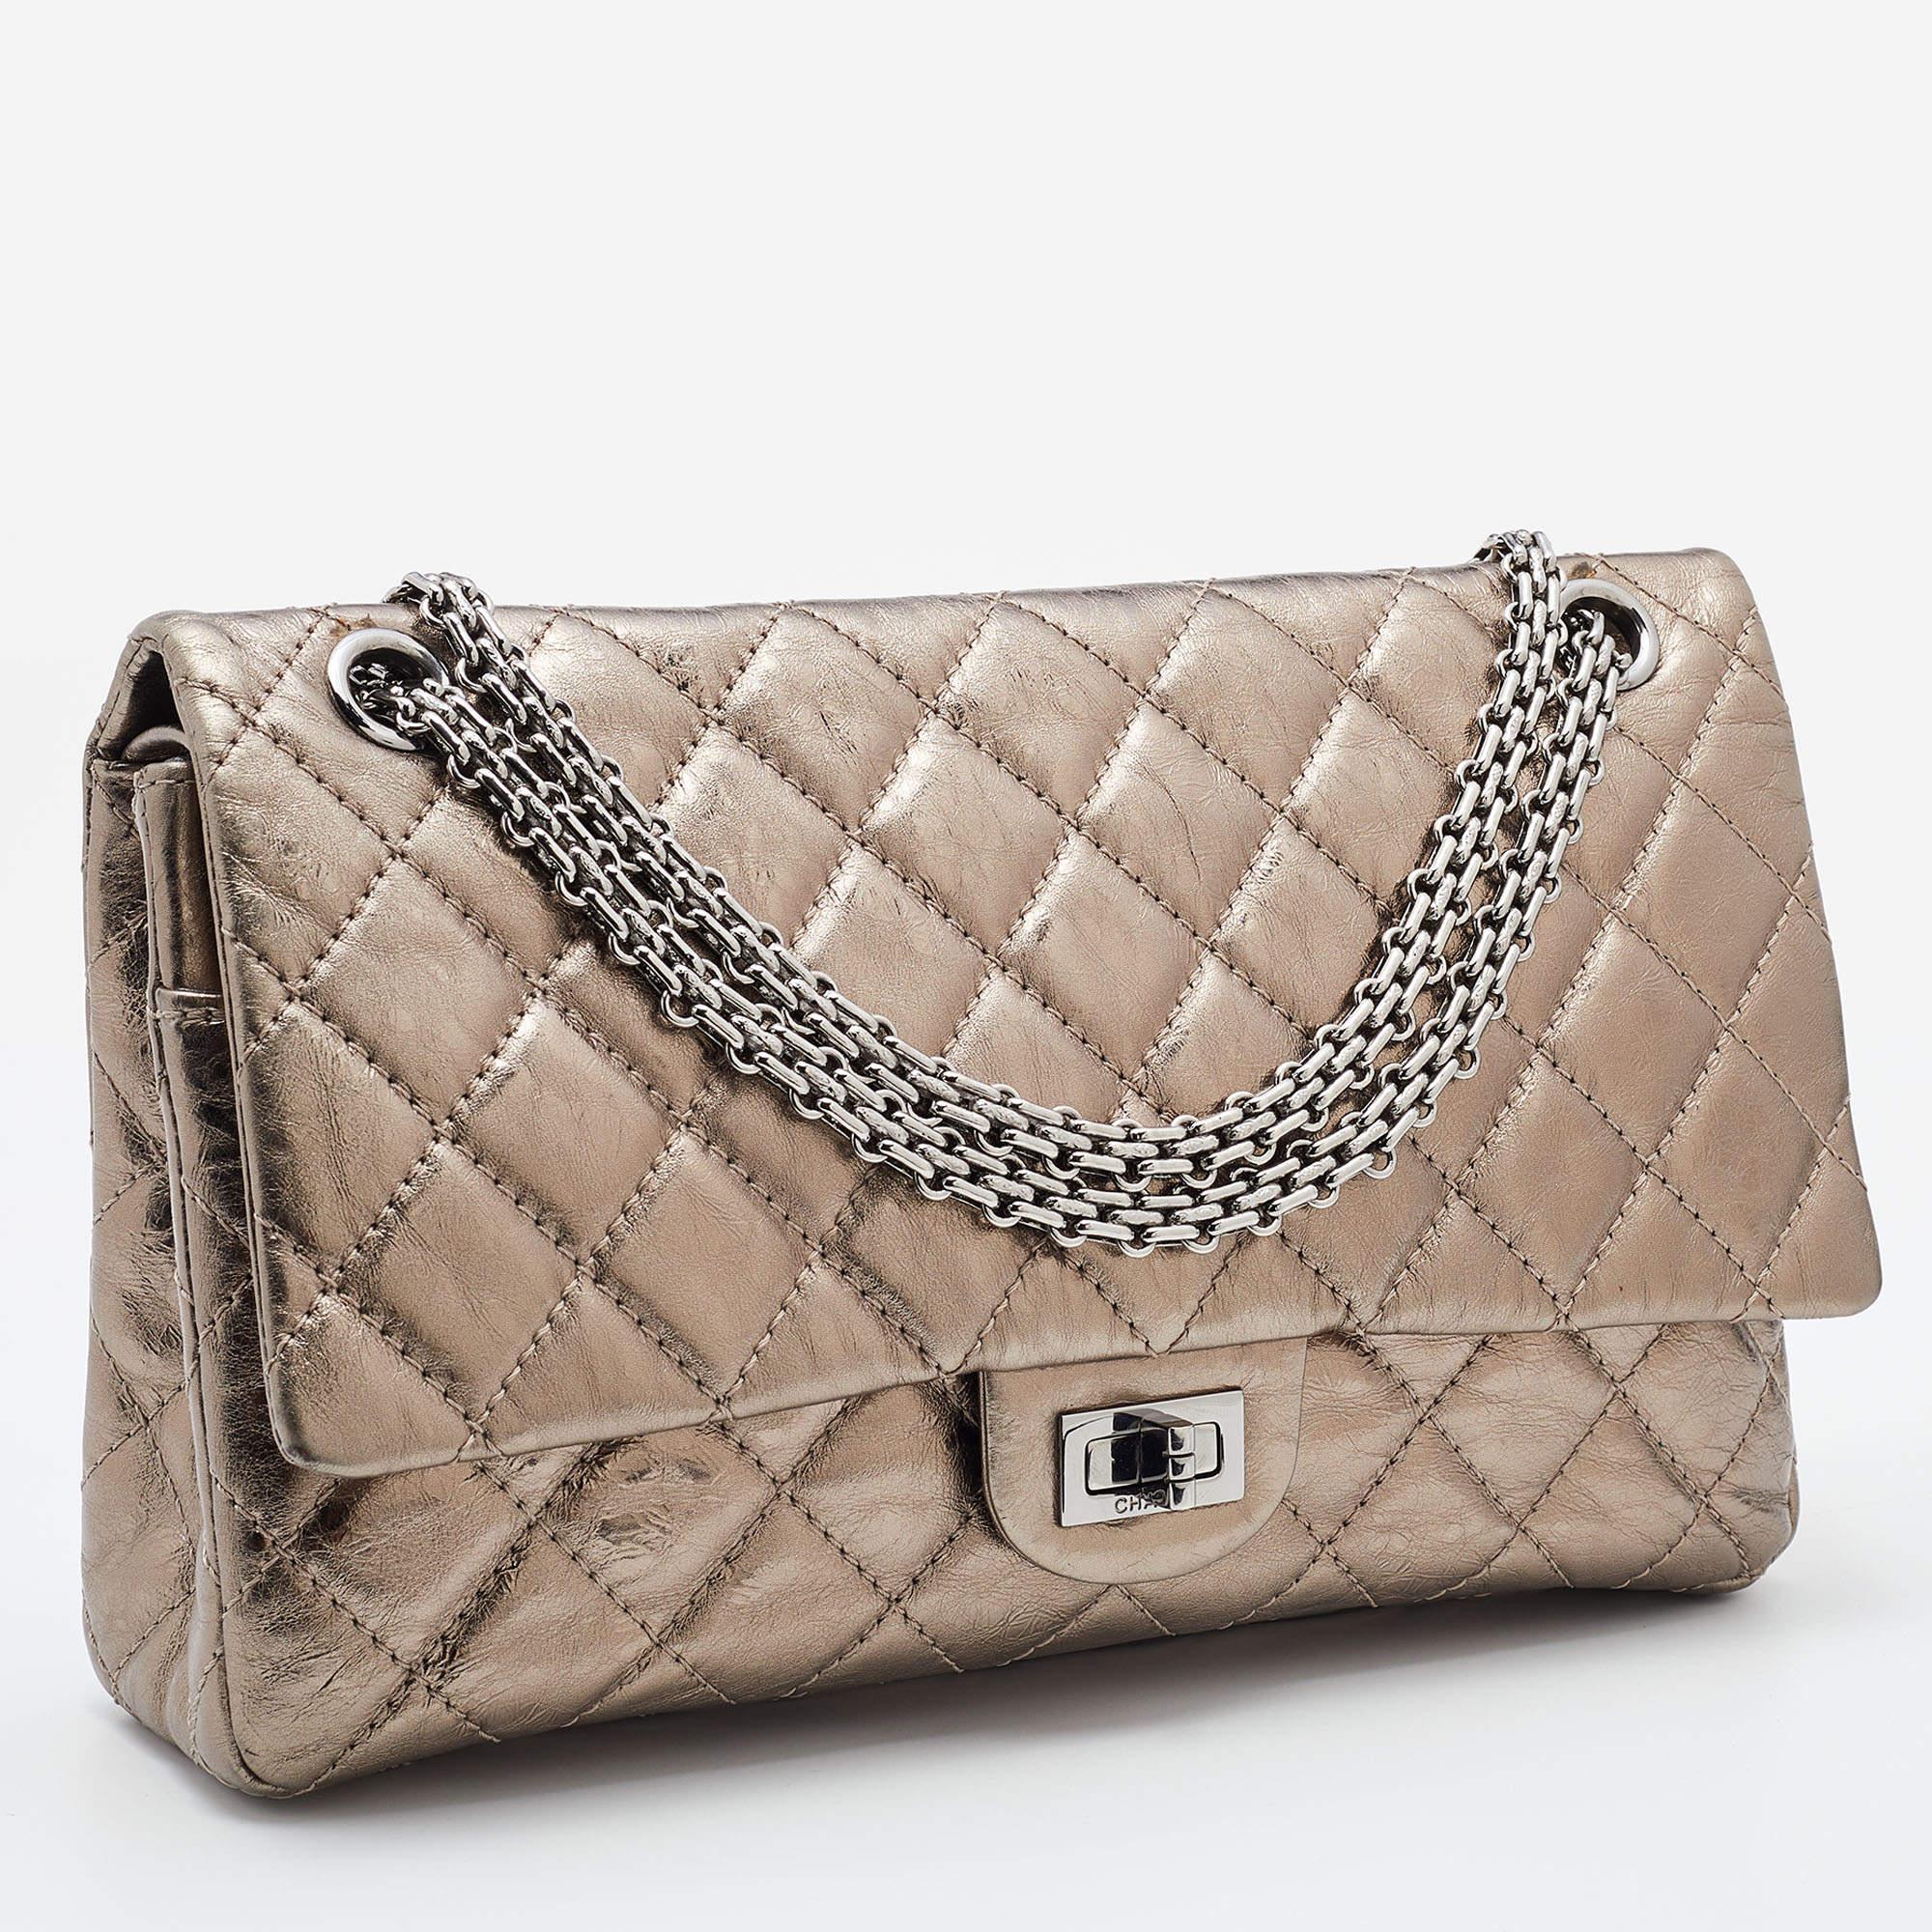 Women's Chanel Metallic Quilted Aged Leather 226 Reissue 2.55 Flap Bag